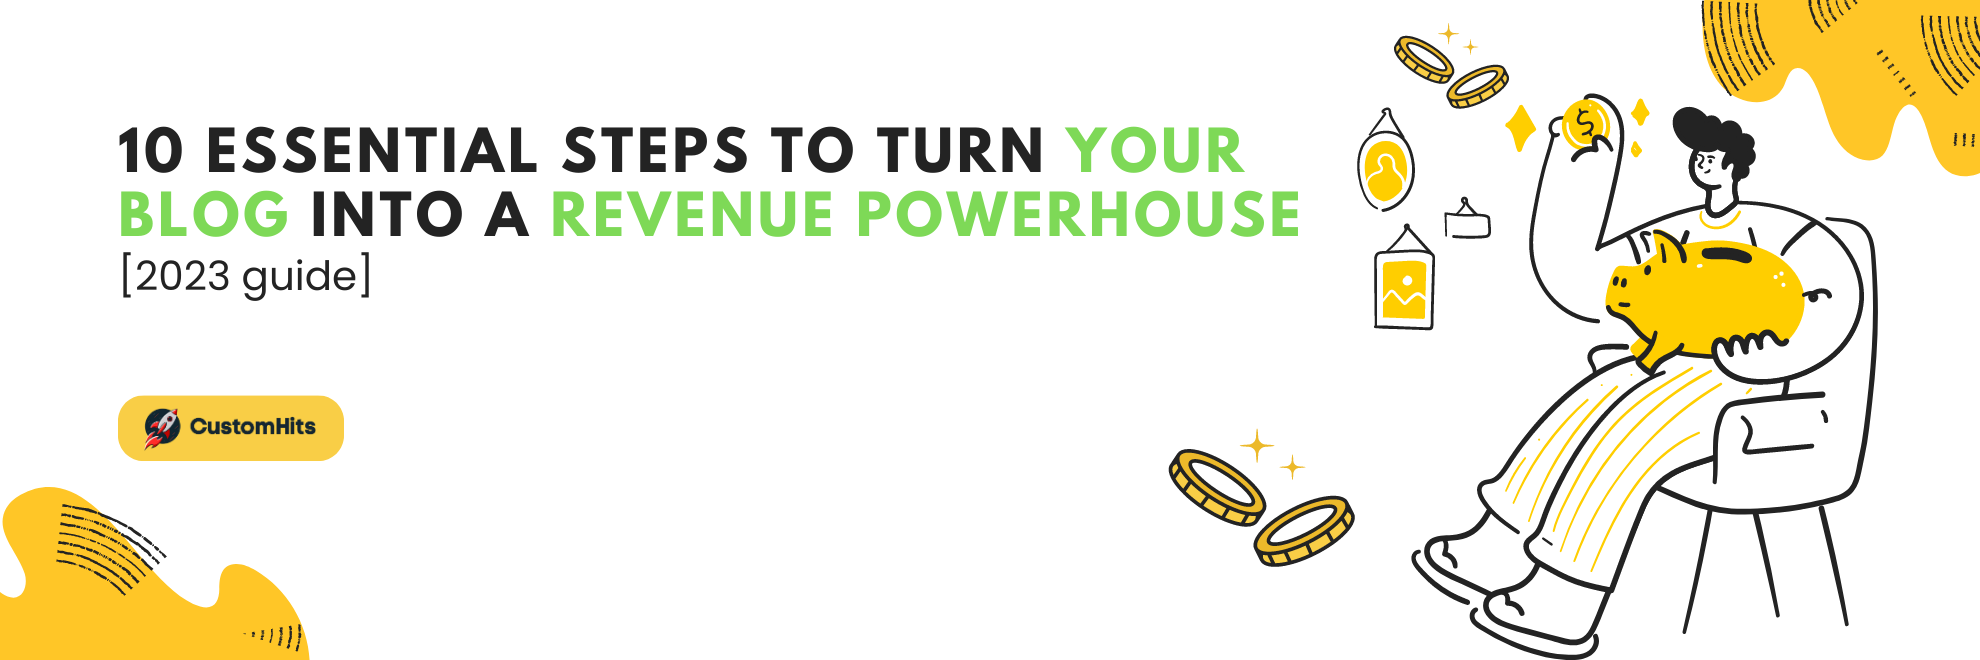 10 Essential Steps to Turn Your Blog into a Revenue Powerhouse [2023 Guide]